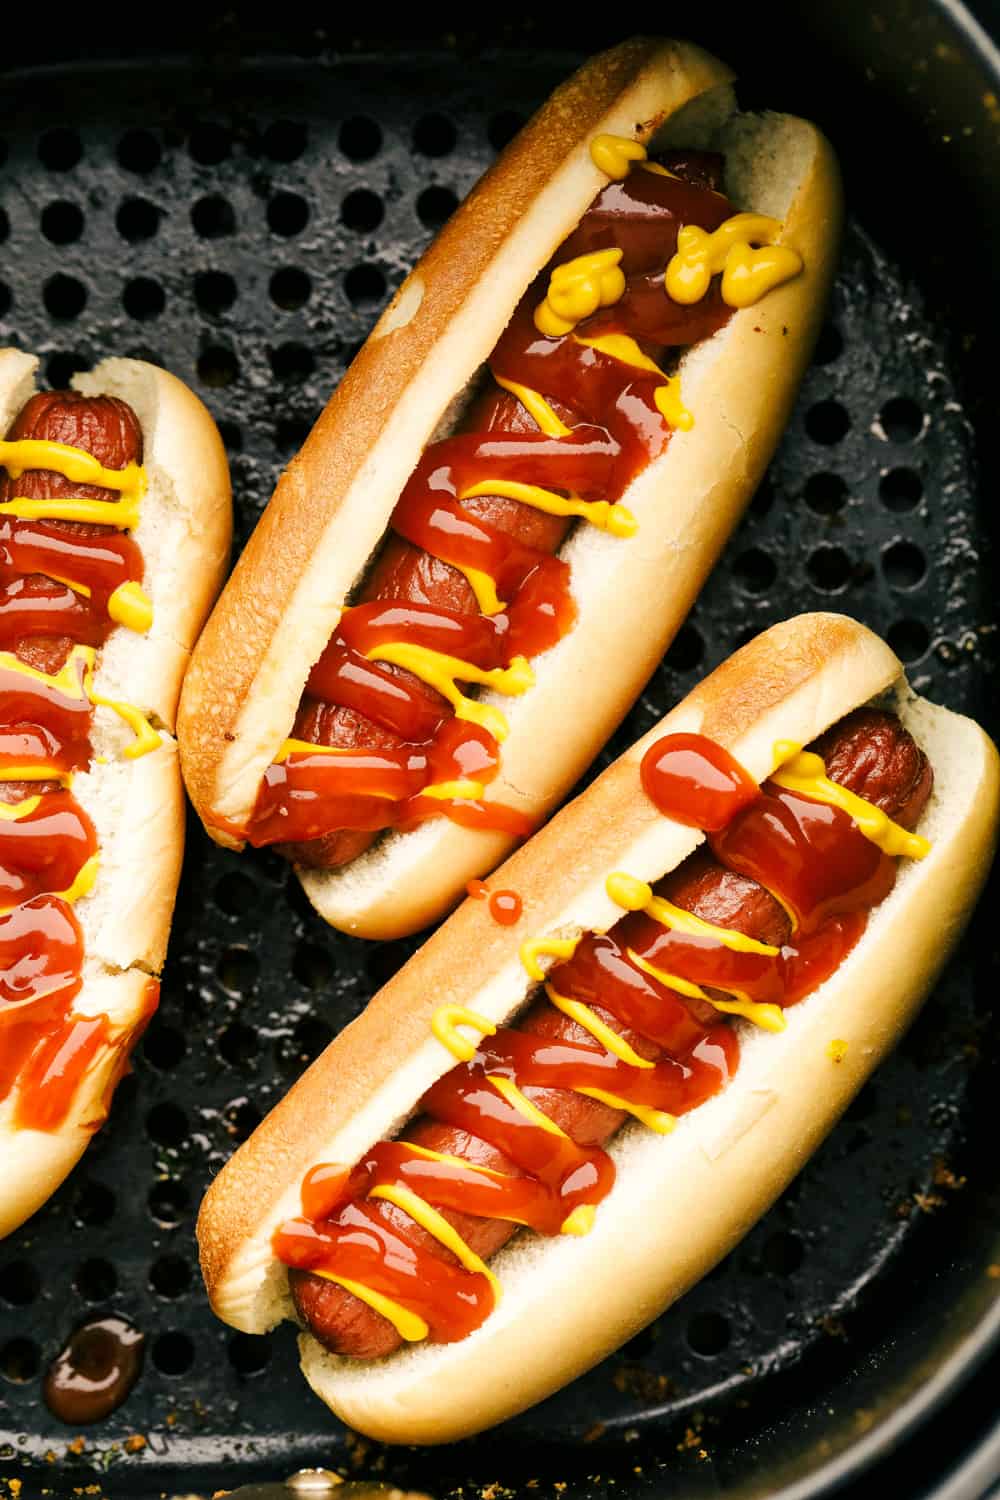 Hot dogs in buns with ketchup and mustard up close. 